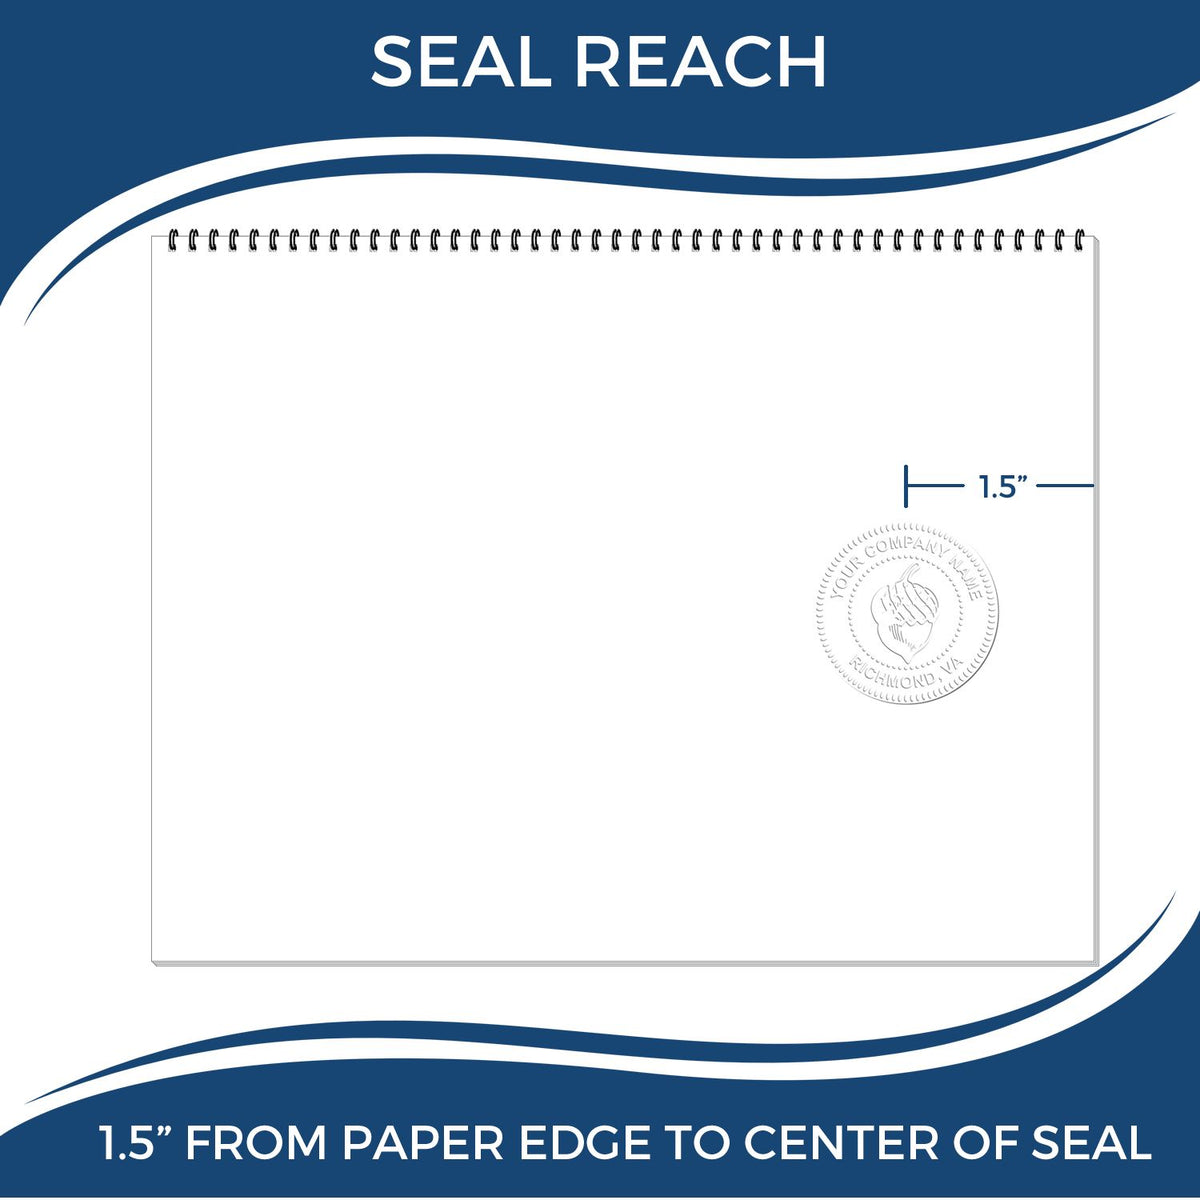 An infographic showing the seal reach which is represented by a ruler and a miniature seal image of the Gift Vermont Landscape Architect Seal